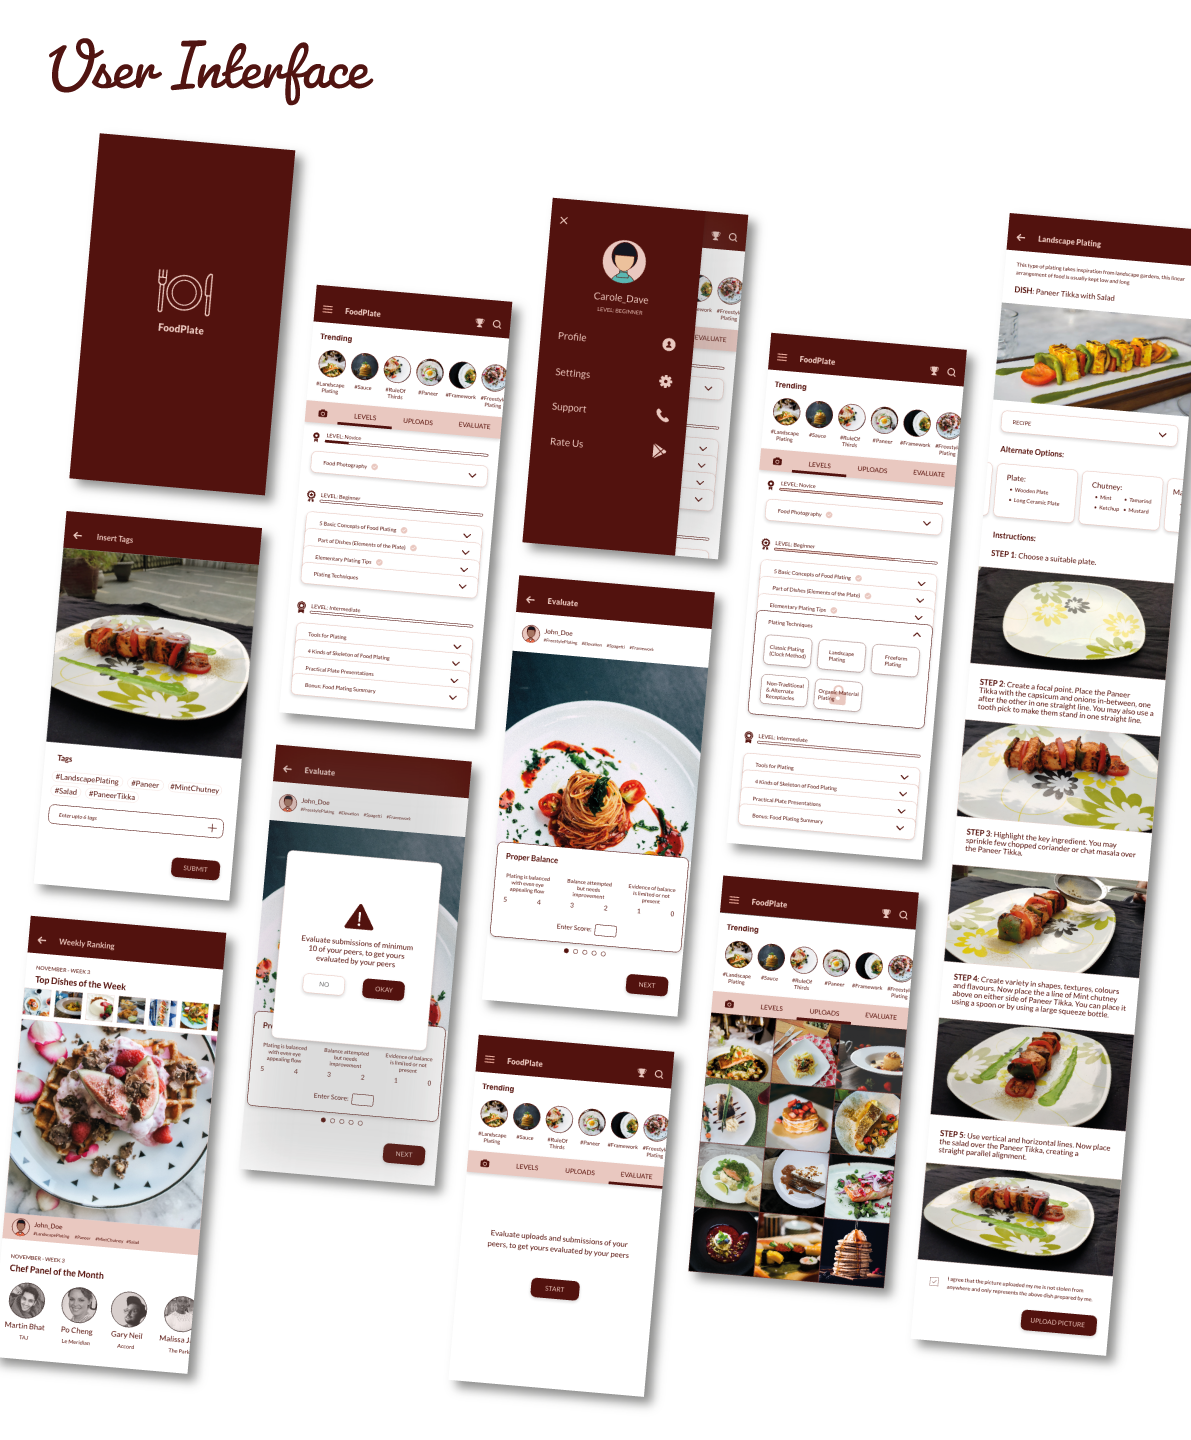 Instructional Design food plating BLOOM'S TAXONOMY ux/ui design Mobile Application cooking food photography wireframes user interface online questionnaire